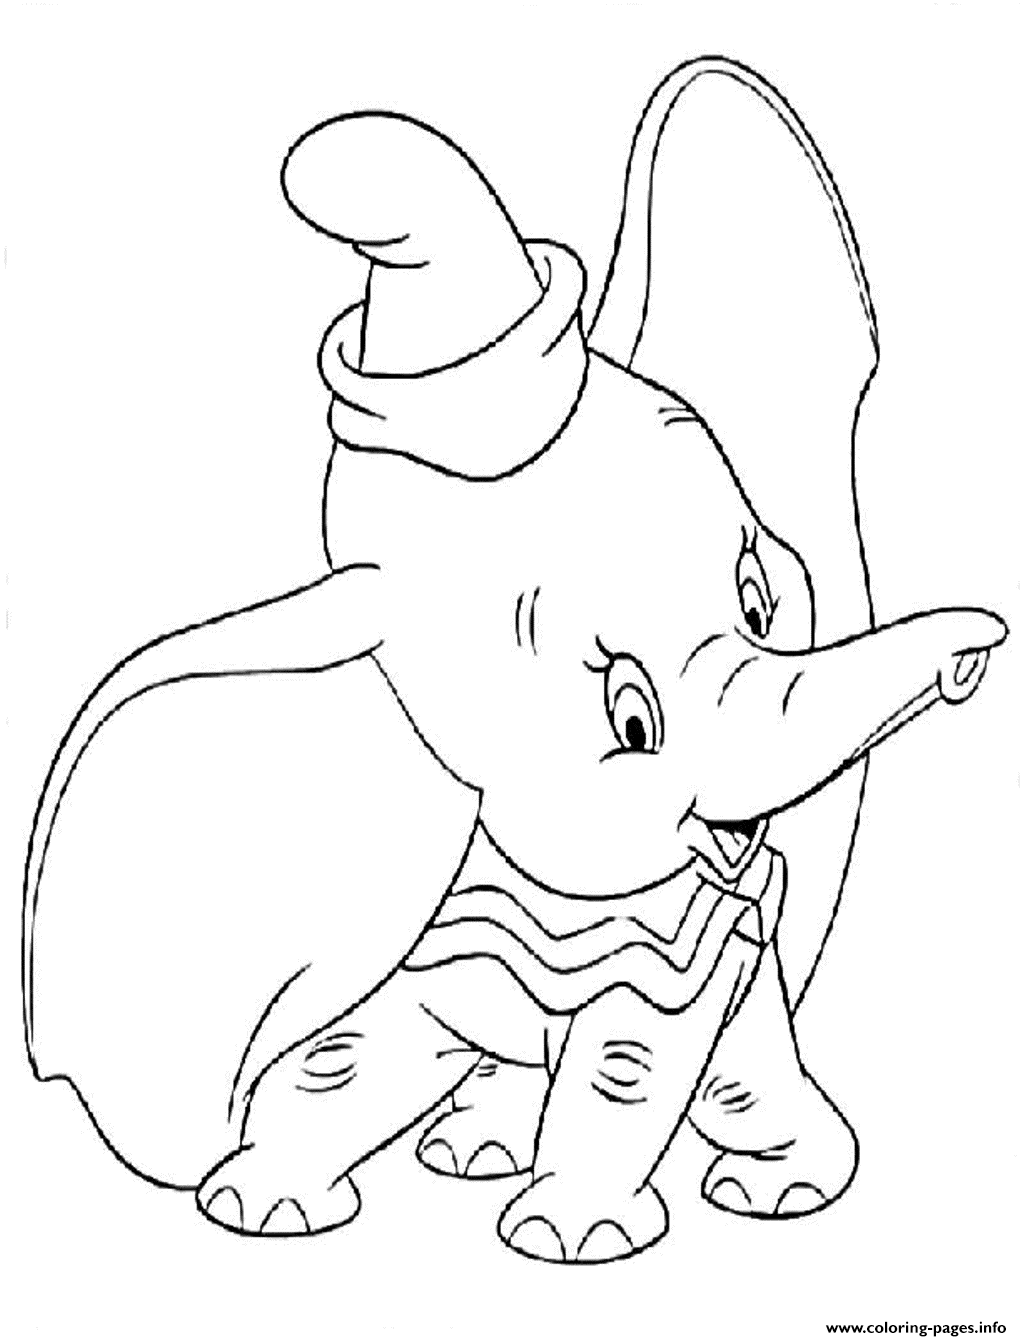 Cute Dumbo Cartoon S For Kids4b67 Coloring Pages Printable